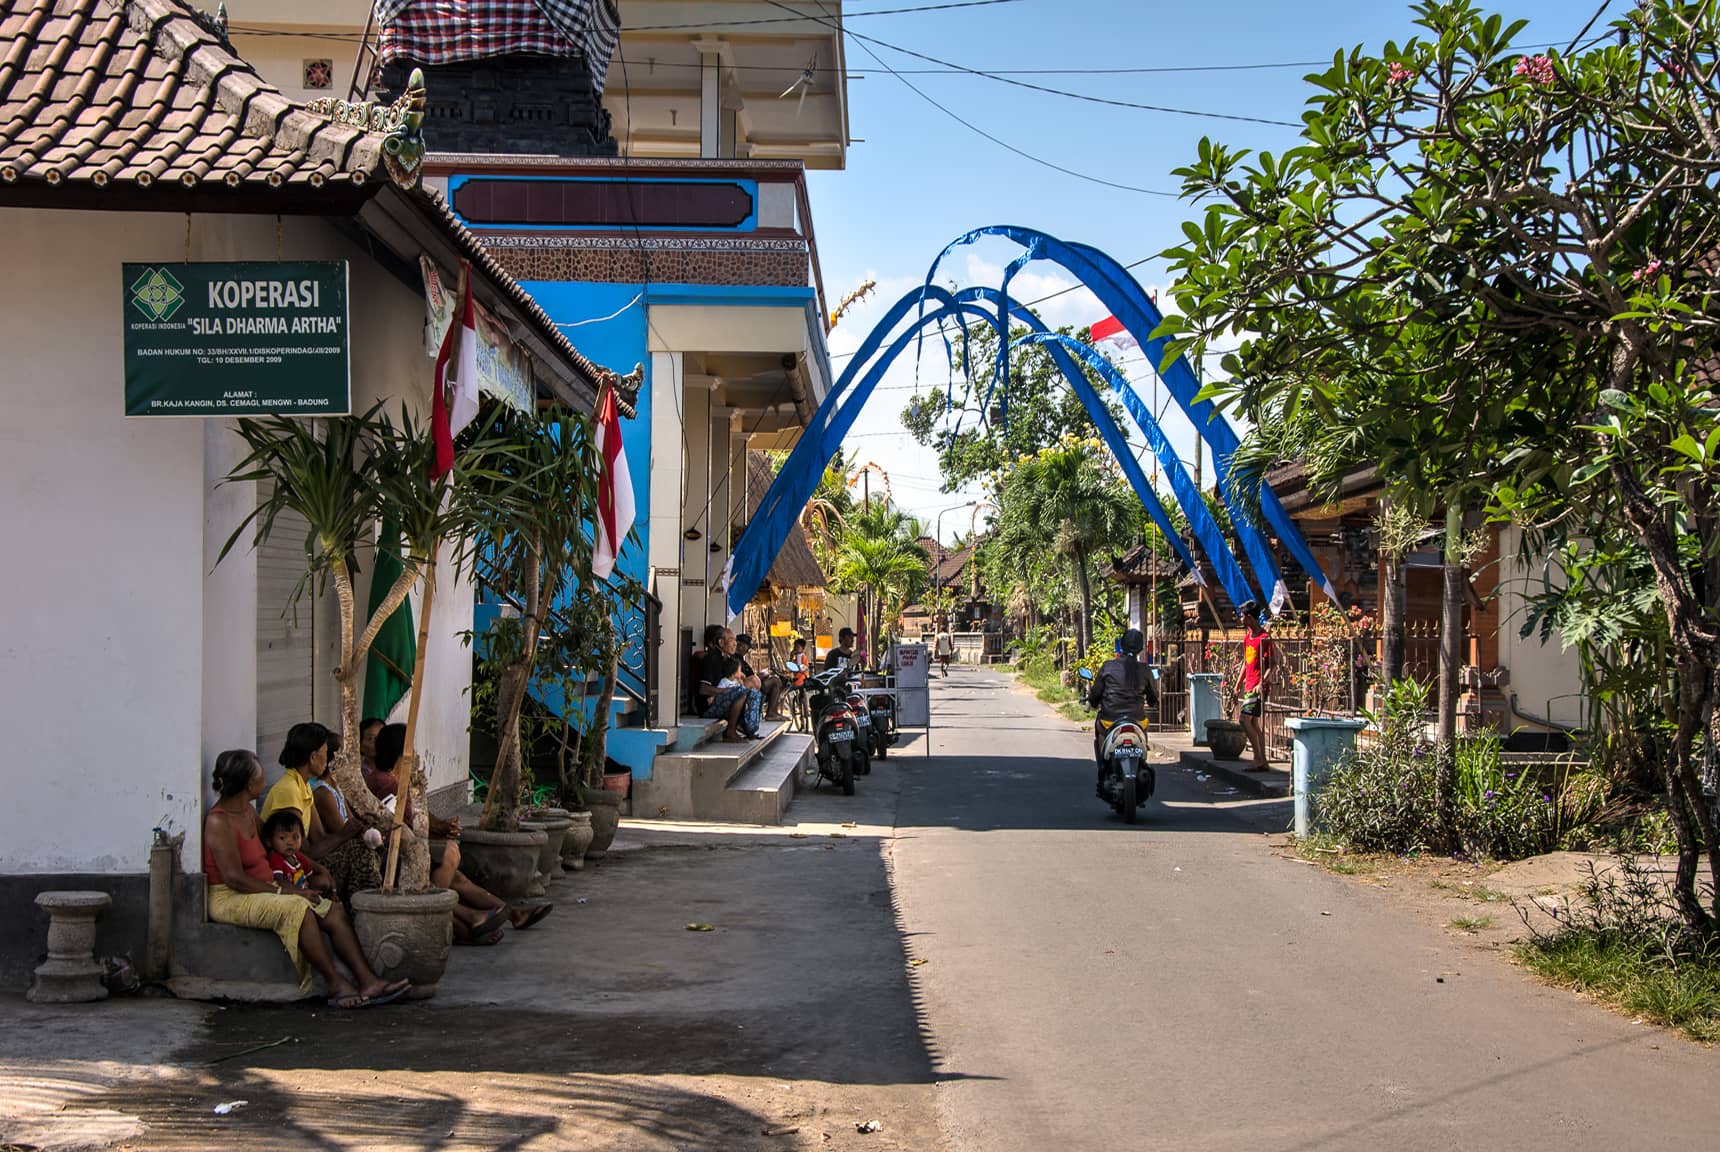 Professional photos of life in traditional Balinese villages - Desa Seseh